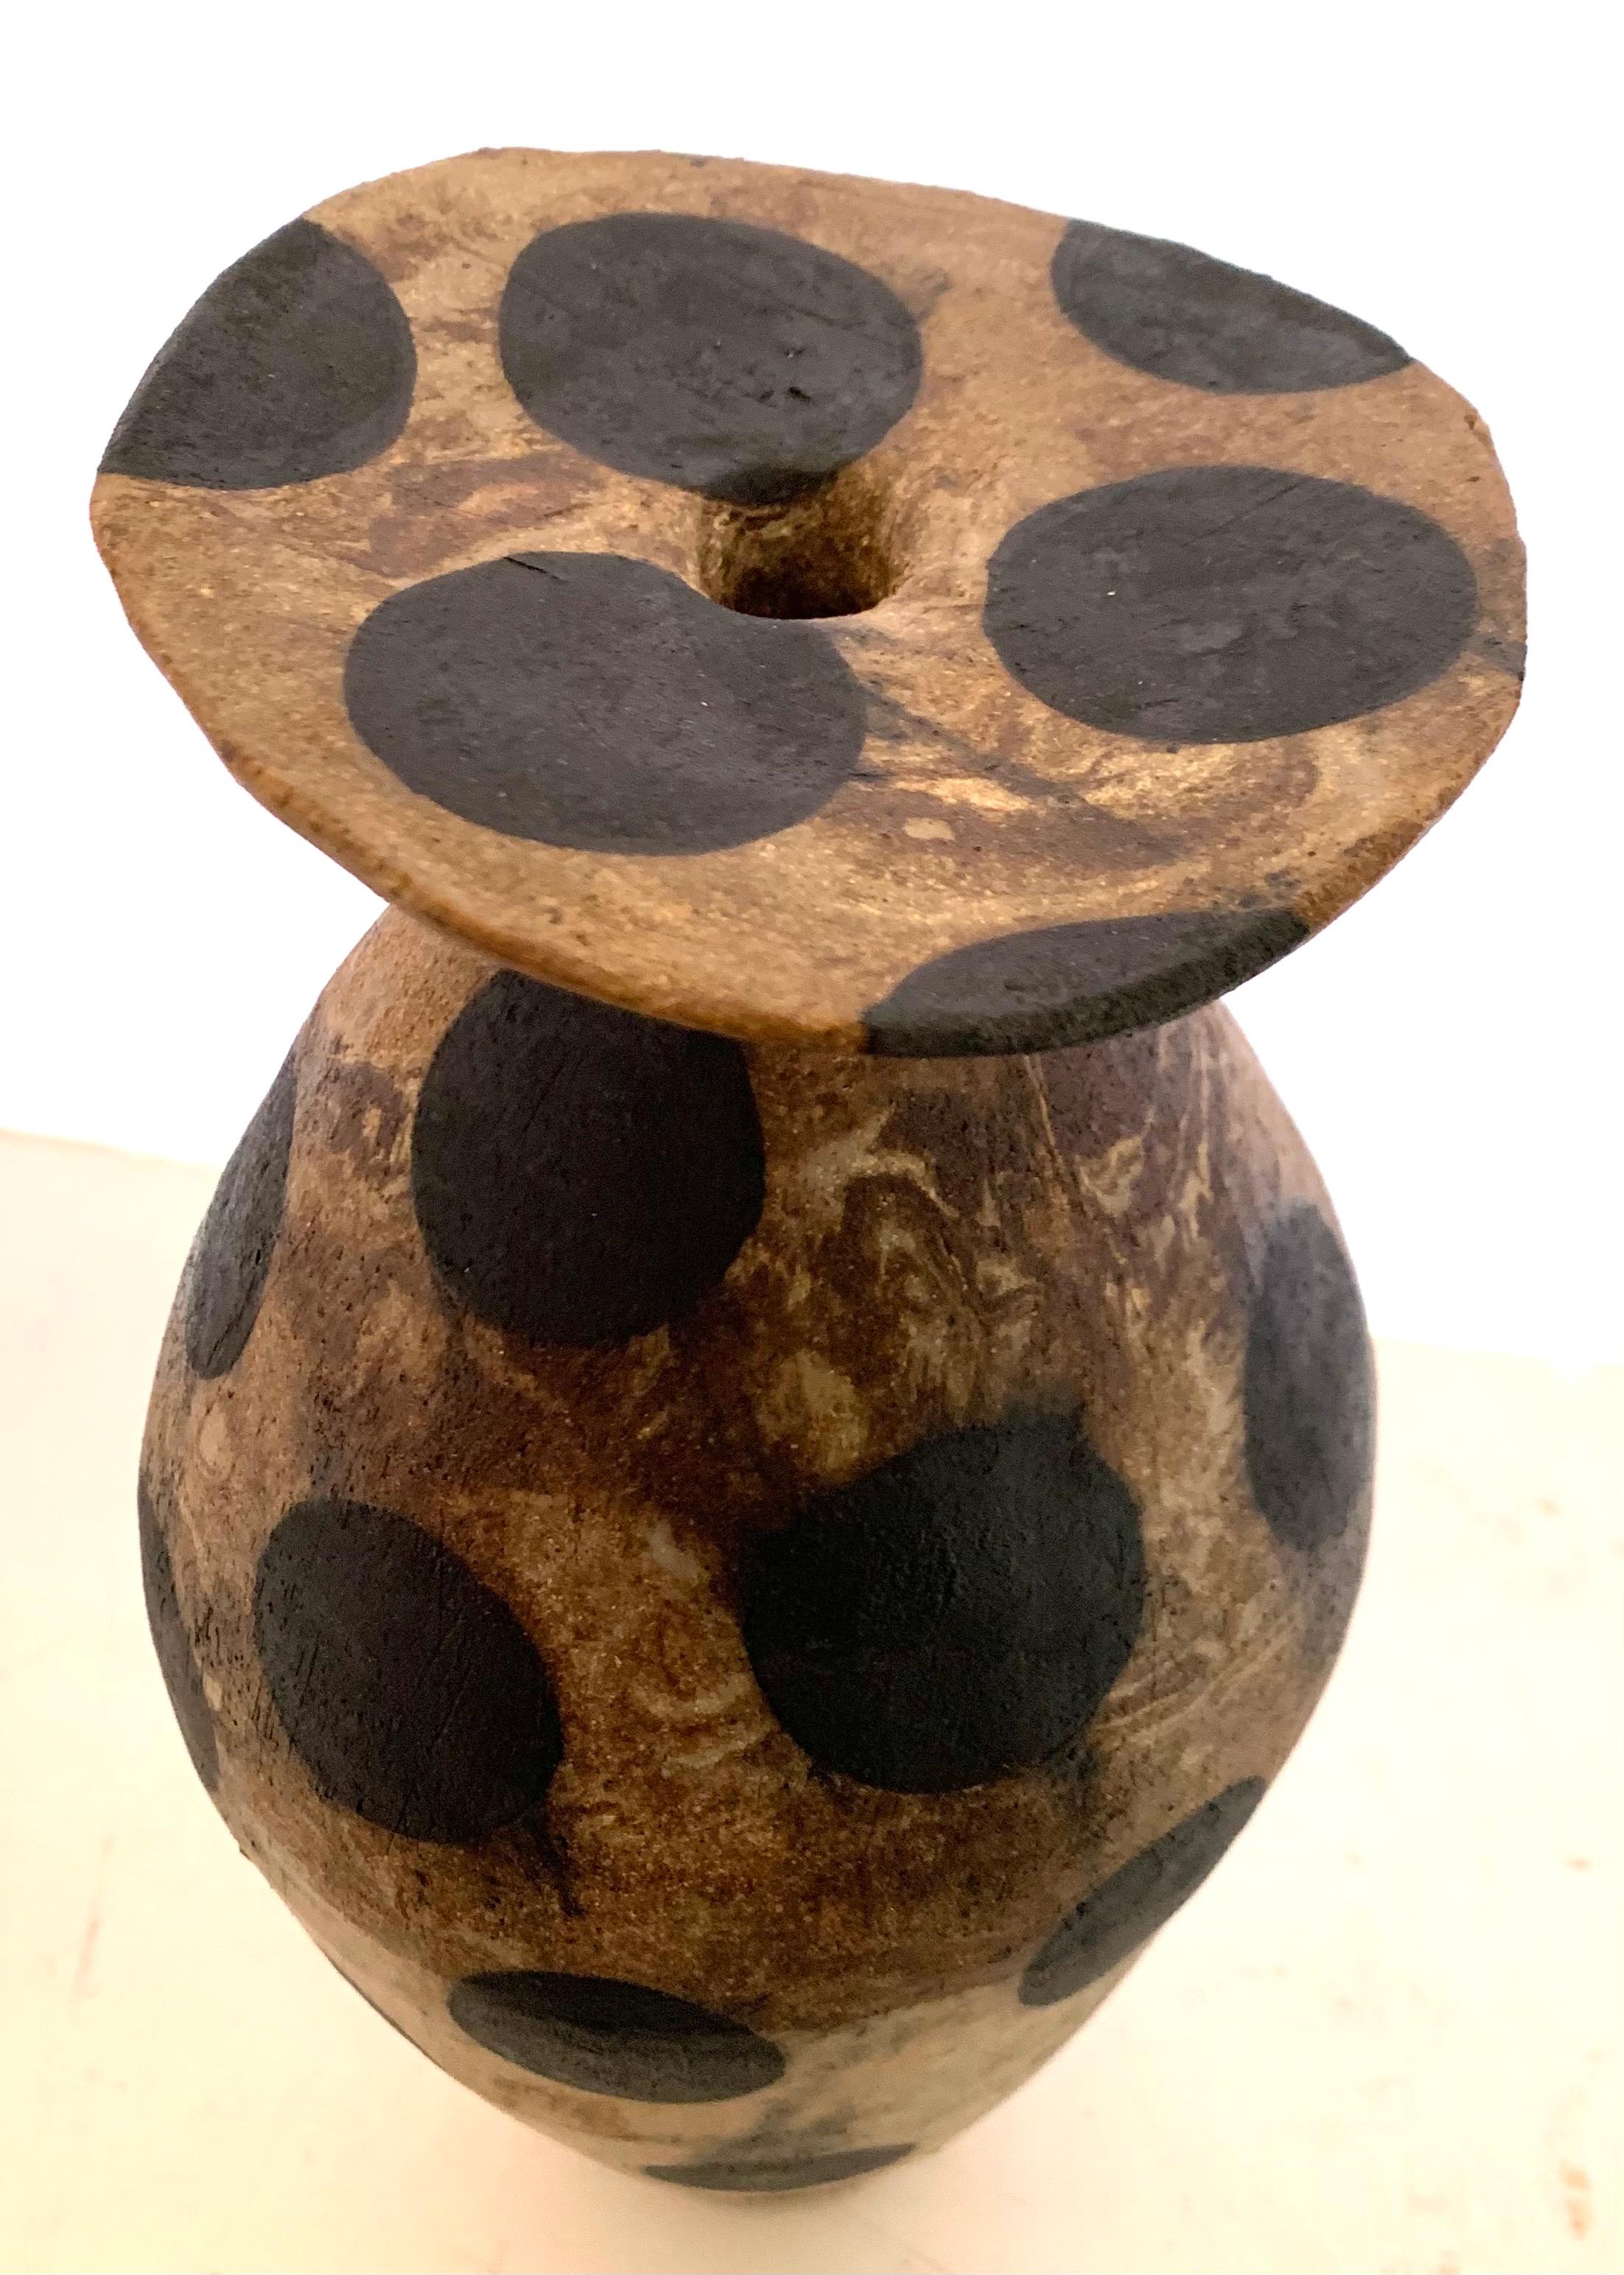 Contemporary American ceramicist Brenda Holzke unique one of a kind ceramic vase that is hand built and made of various colors 
of recycled stoneware clay with iron oxide stain dots.
Decorative large black polka dots on shades of light brown